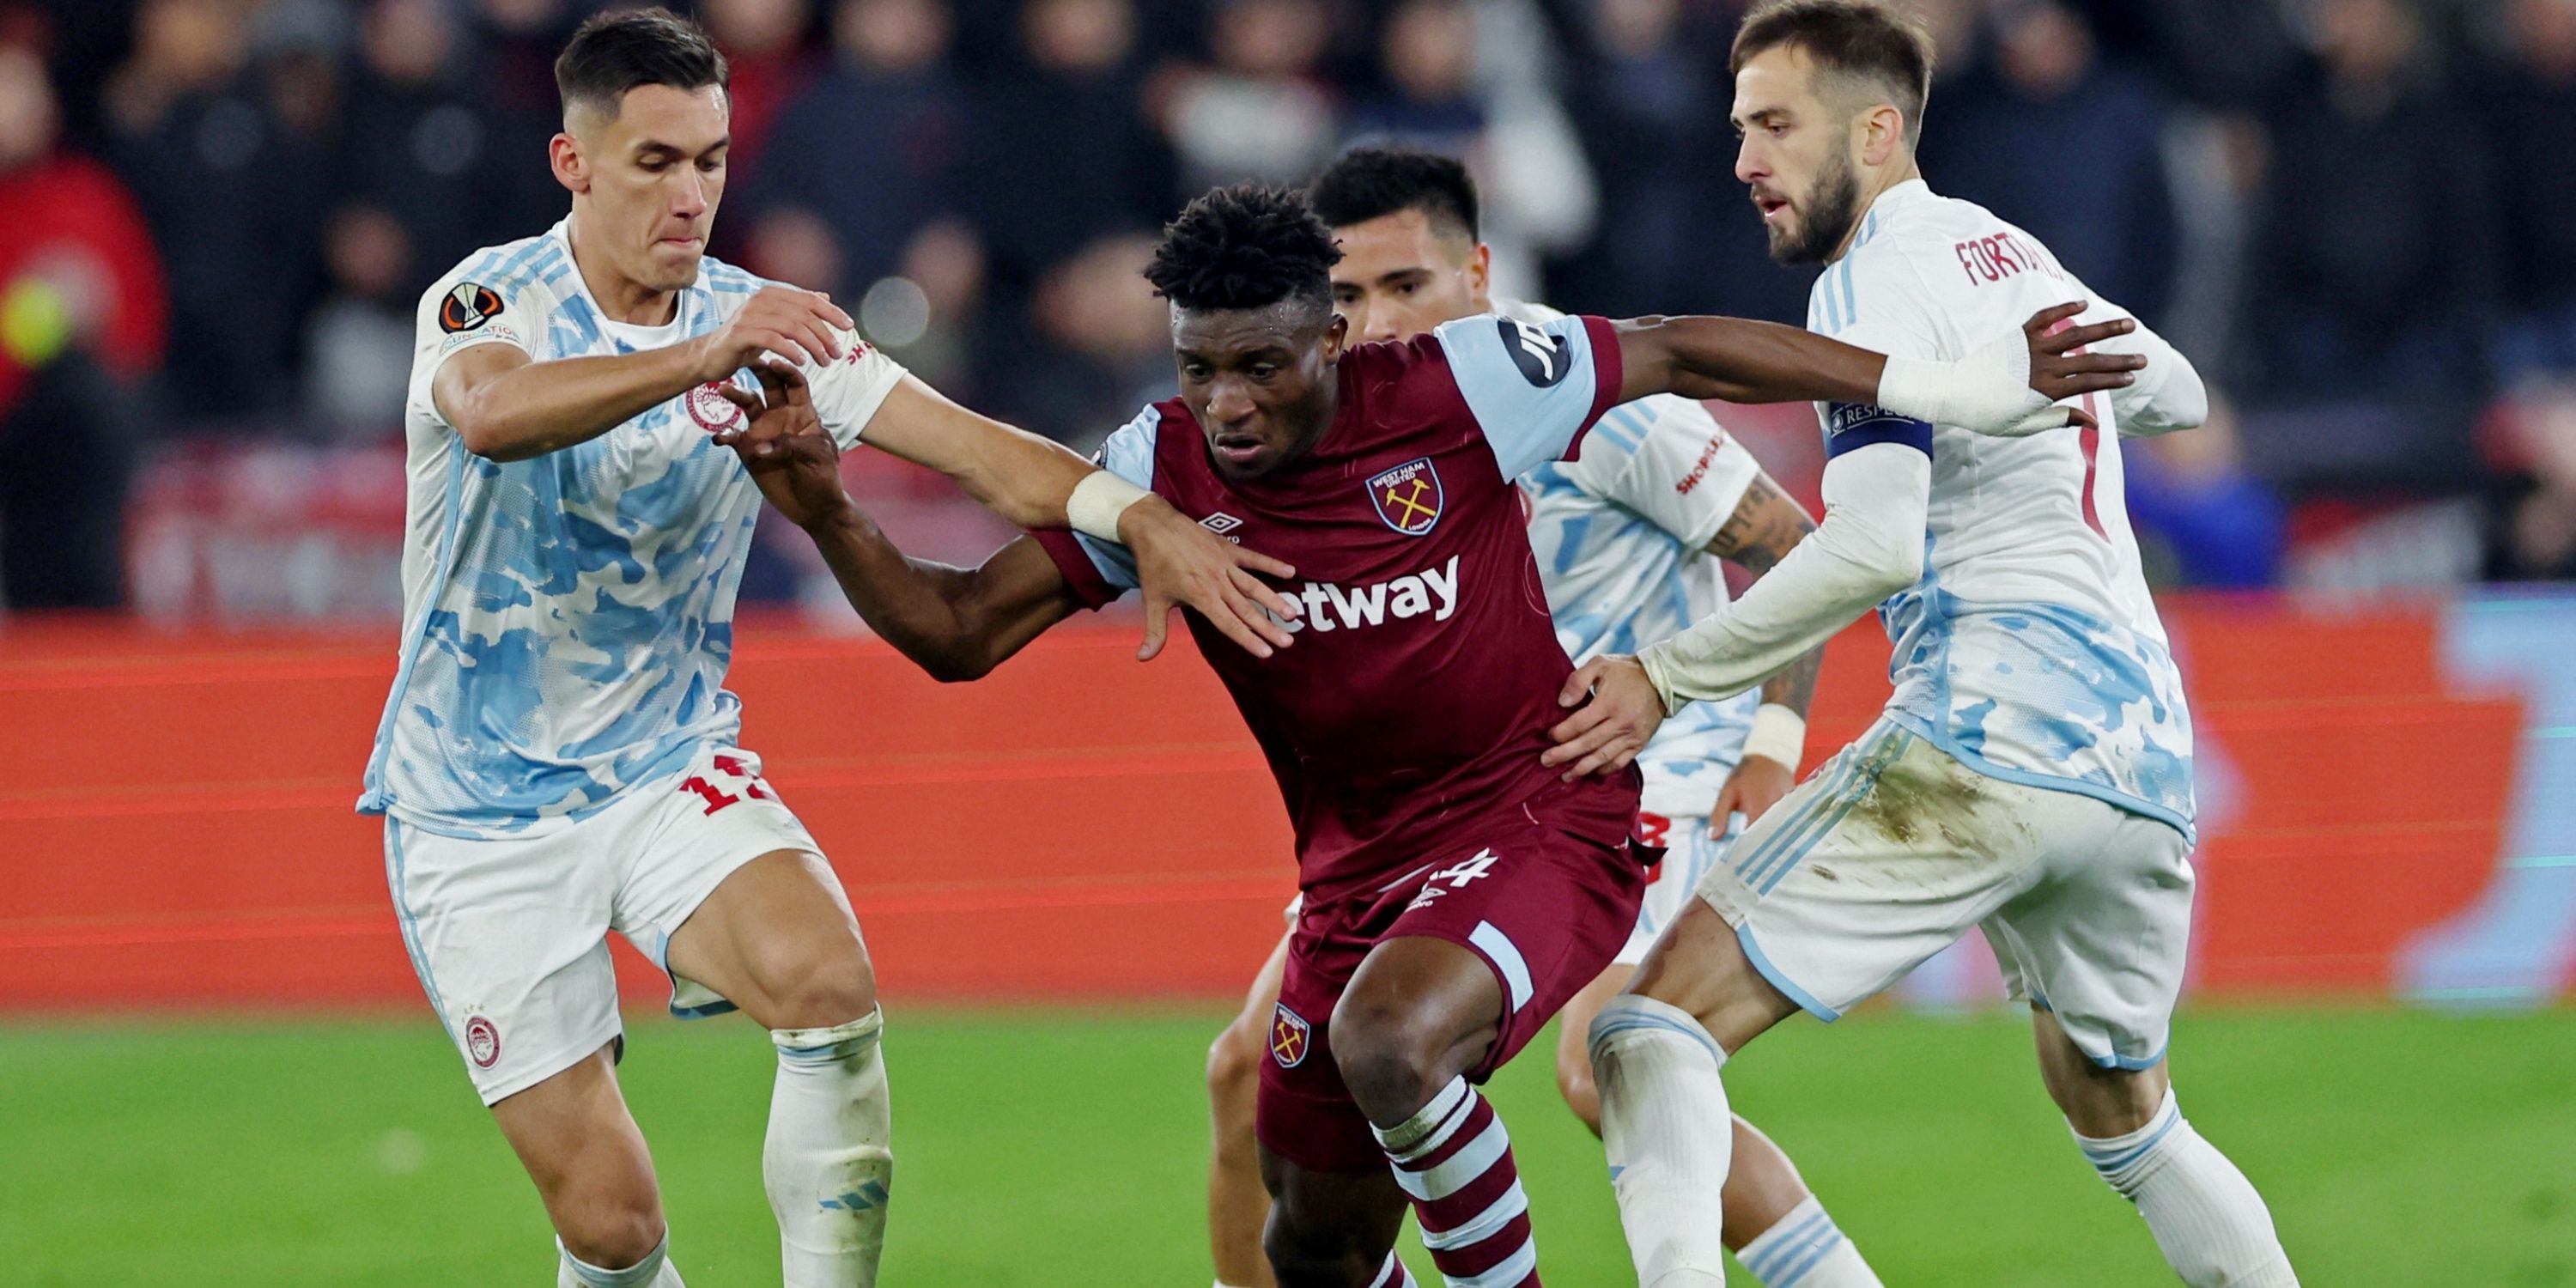 Mohammed Kudus ‘always has smile on his face’ behind closed doors at West Ham